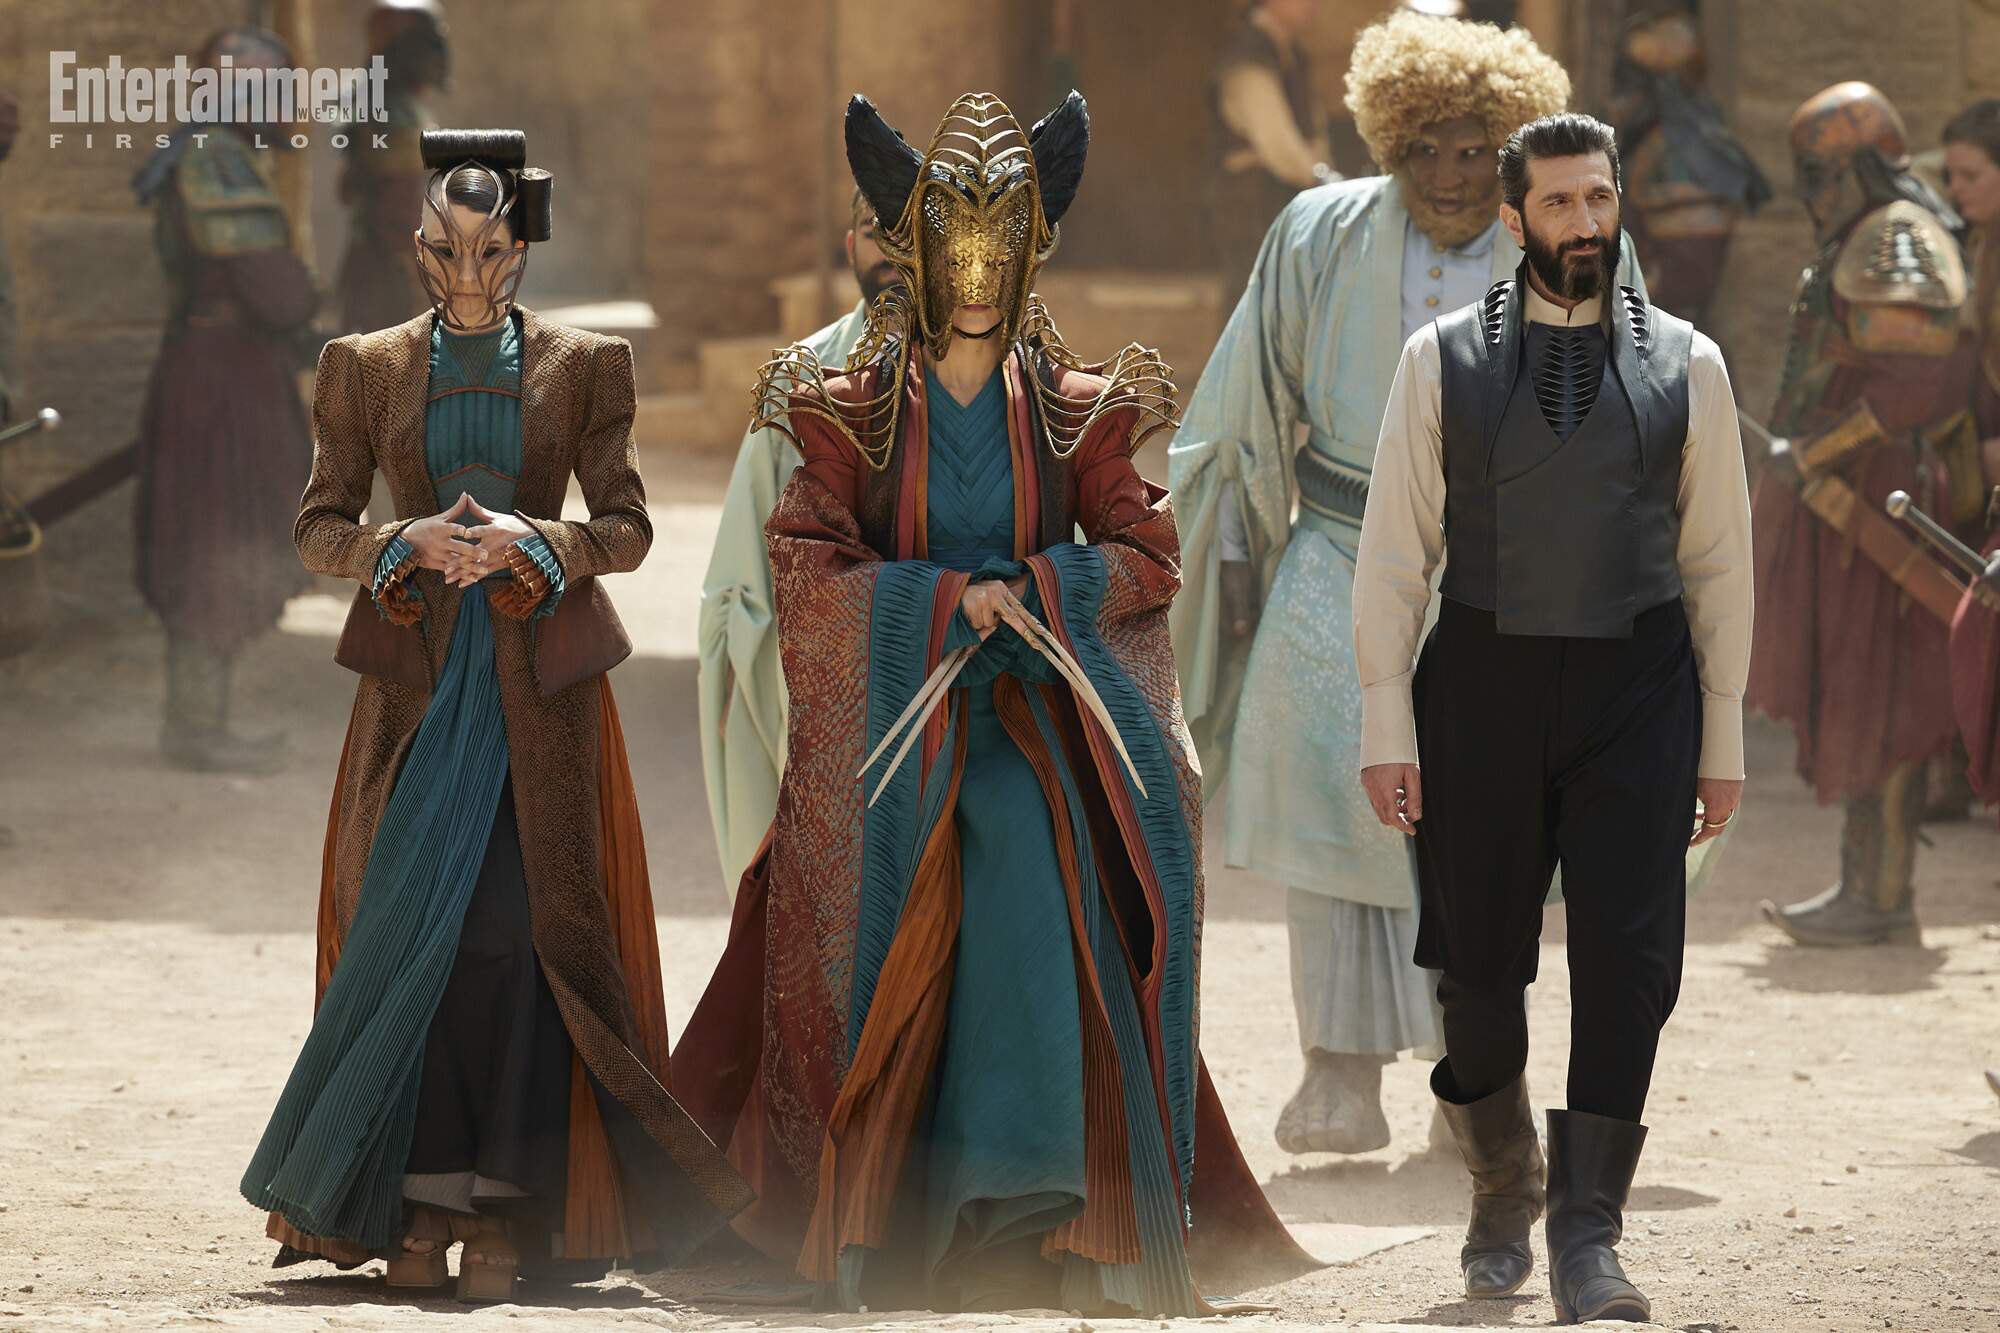 Representatives of the Seanchan Empire, alongside Loial (Hammed Animashaun) and The Dark One (Fares Fares) in 'The Wheel of Time' season 2 | CREDIT: JAN THIJS/PRIME VIDEO